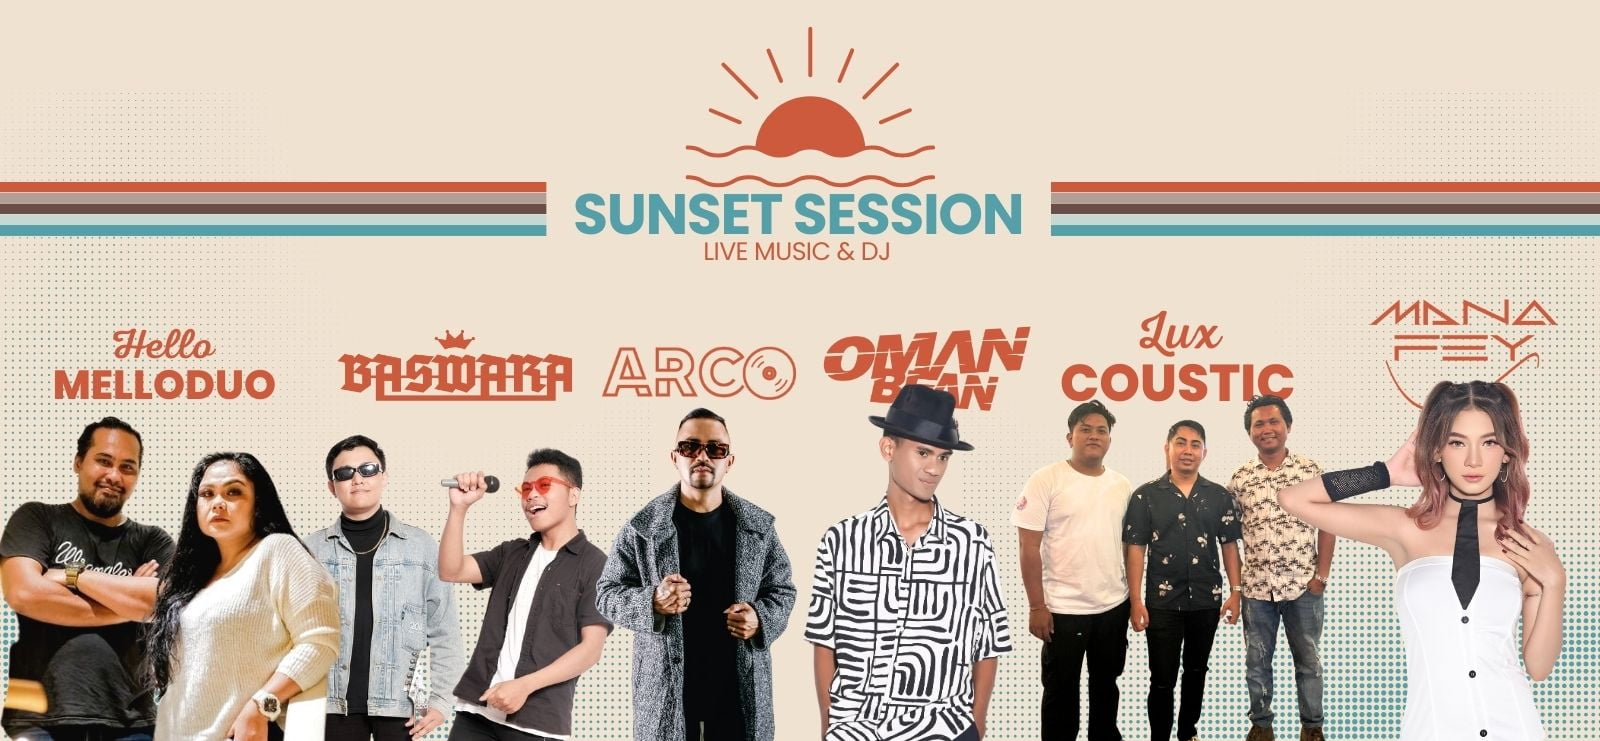 Sunset Session at Cocoon Day Club